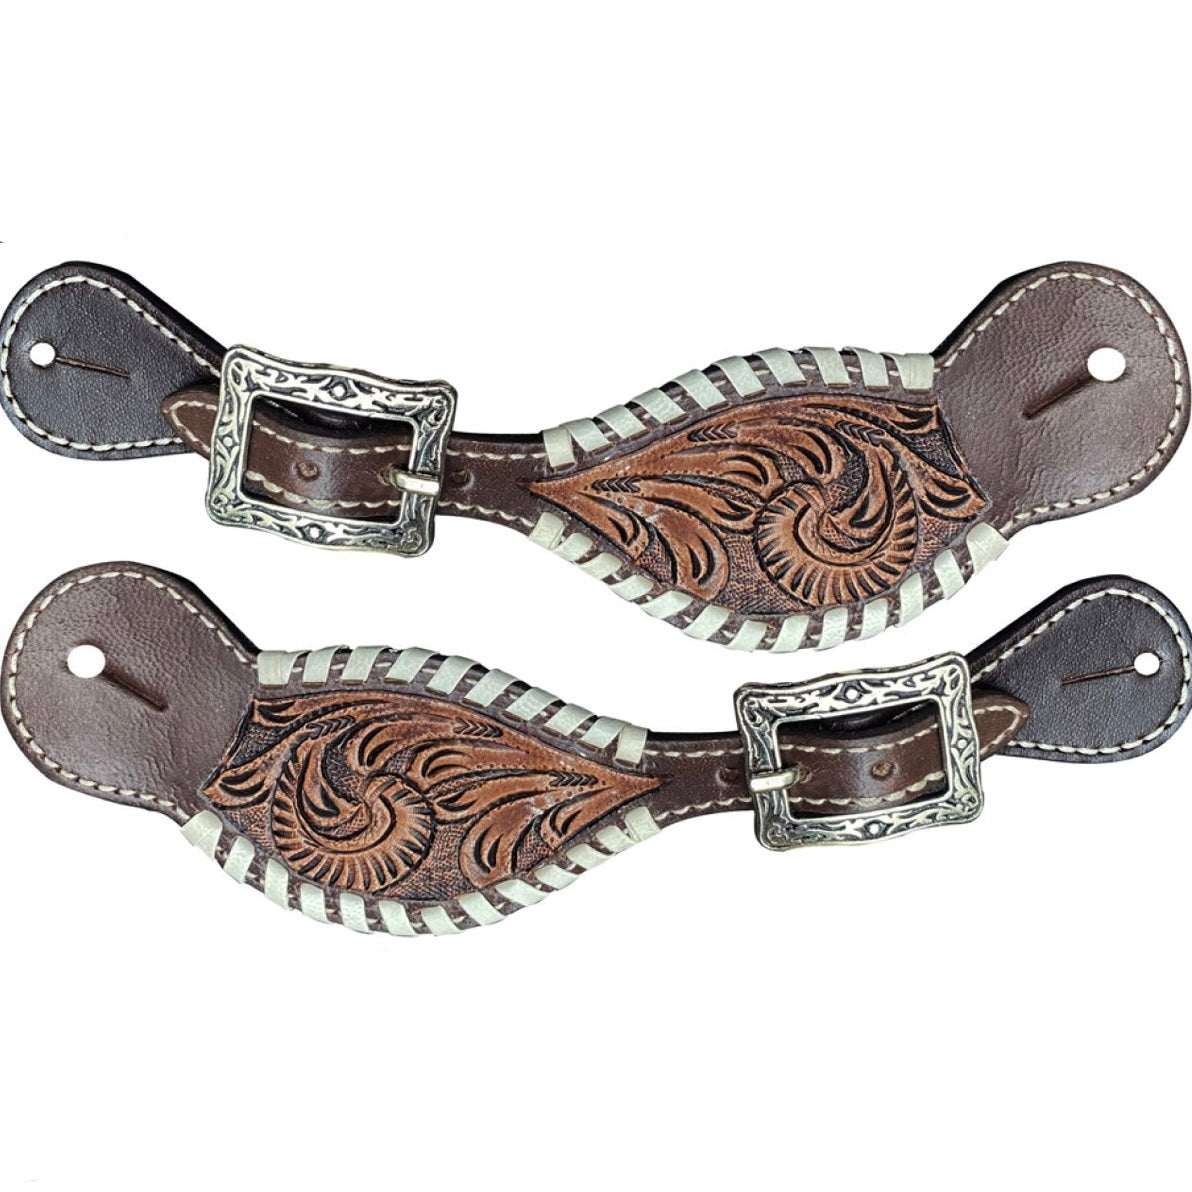 Tooled and laced Spur Straps